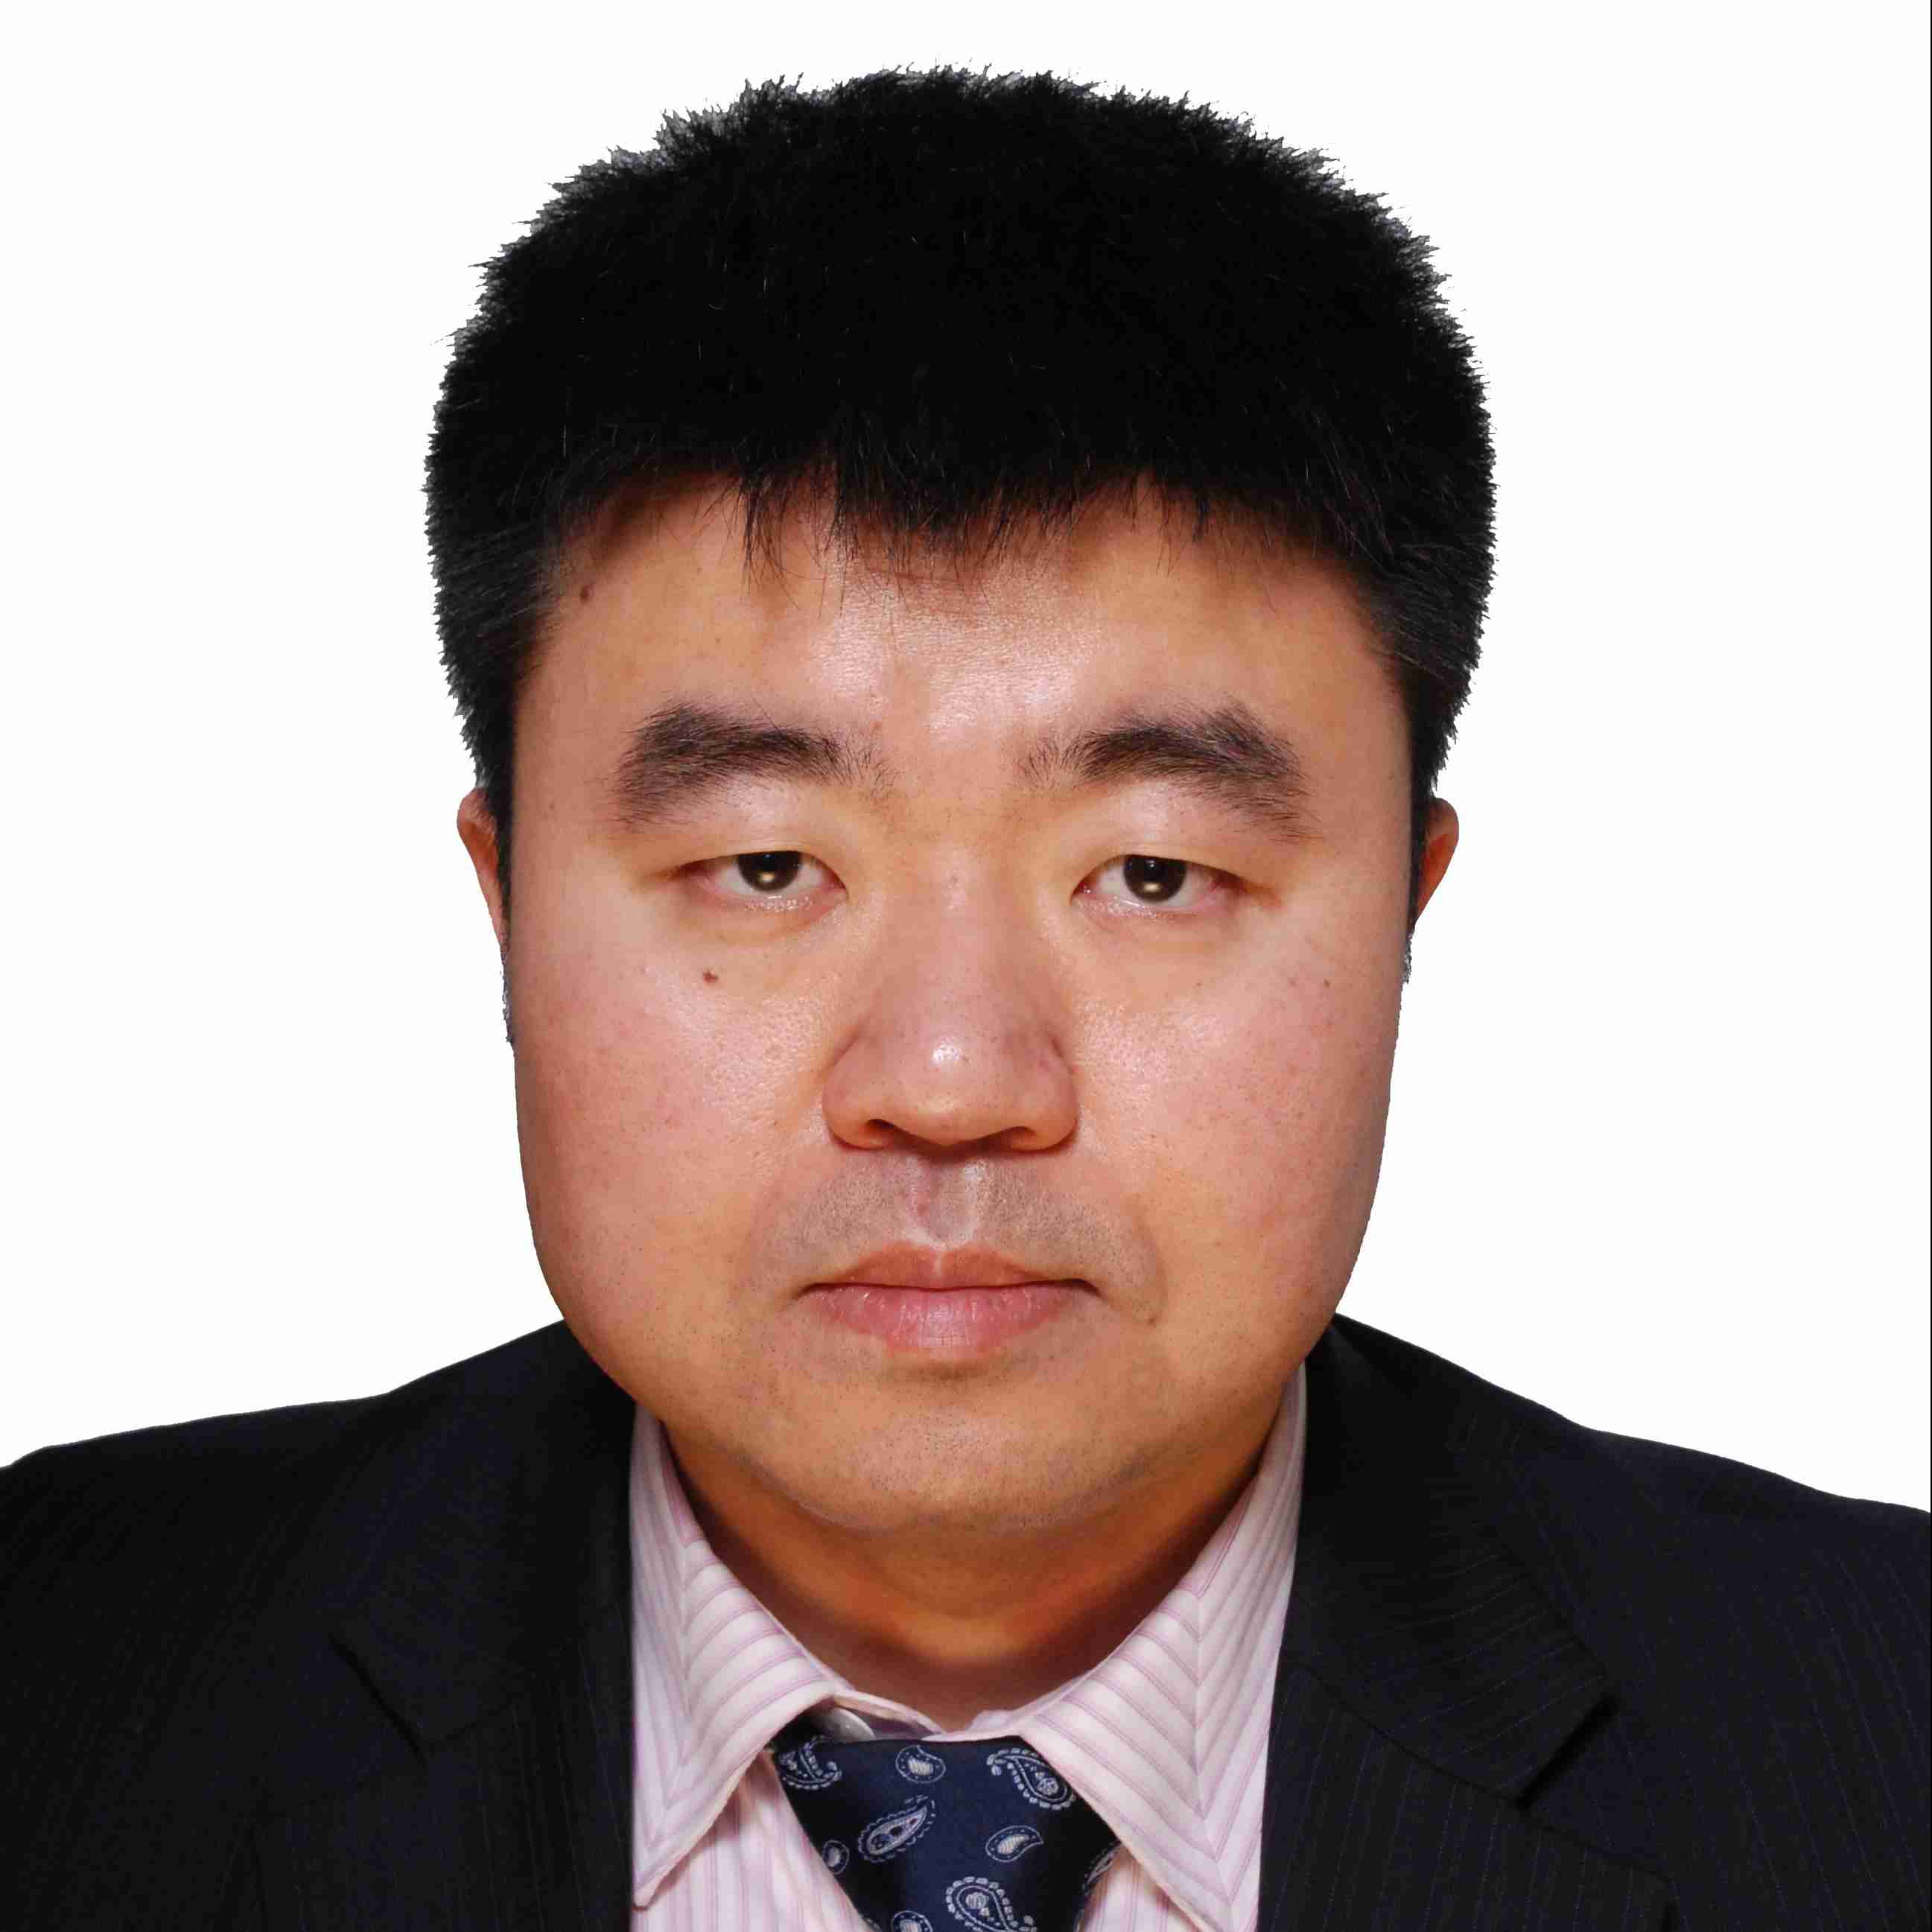 Profile image of Henry Huang